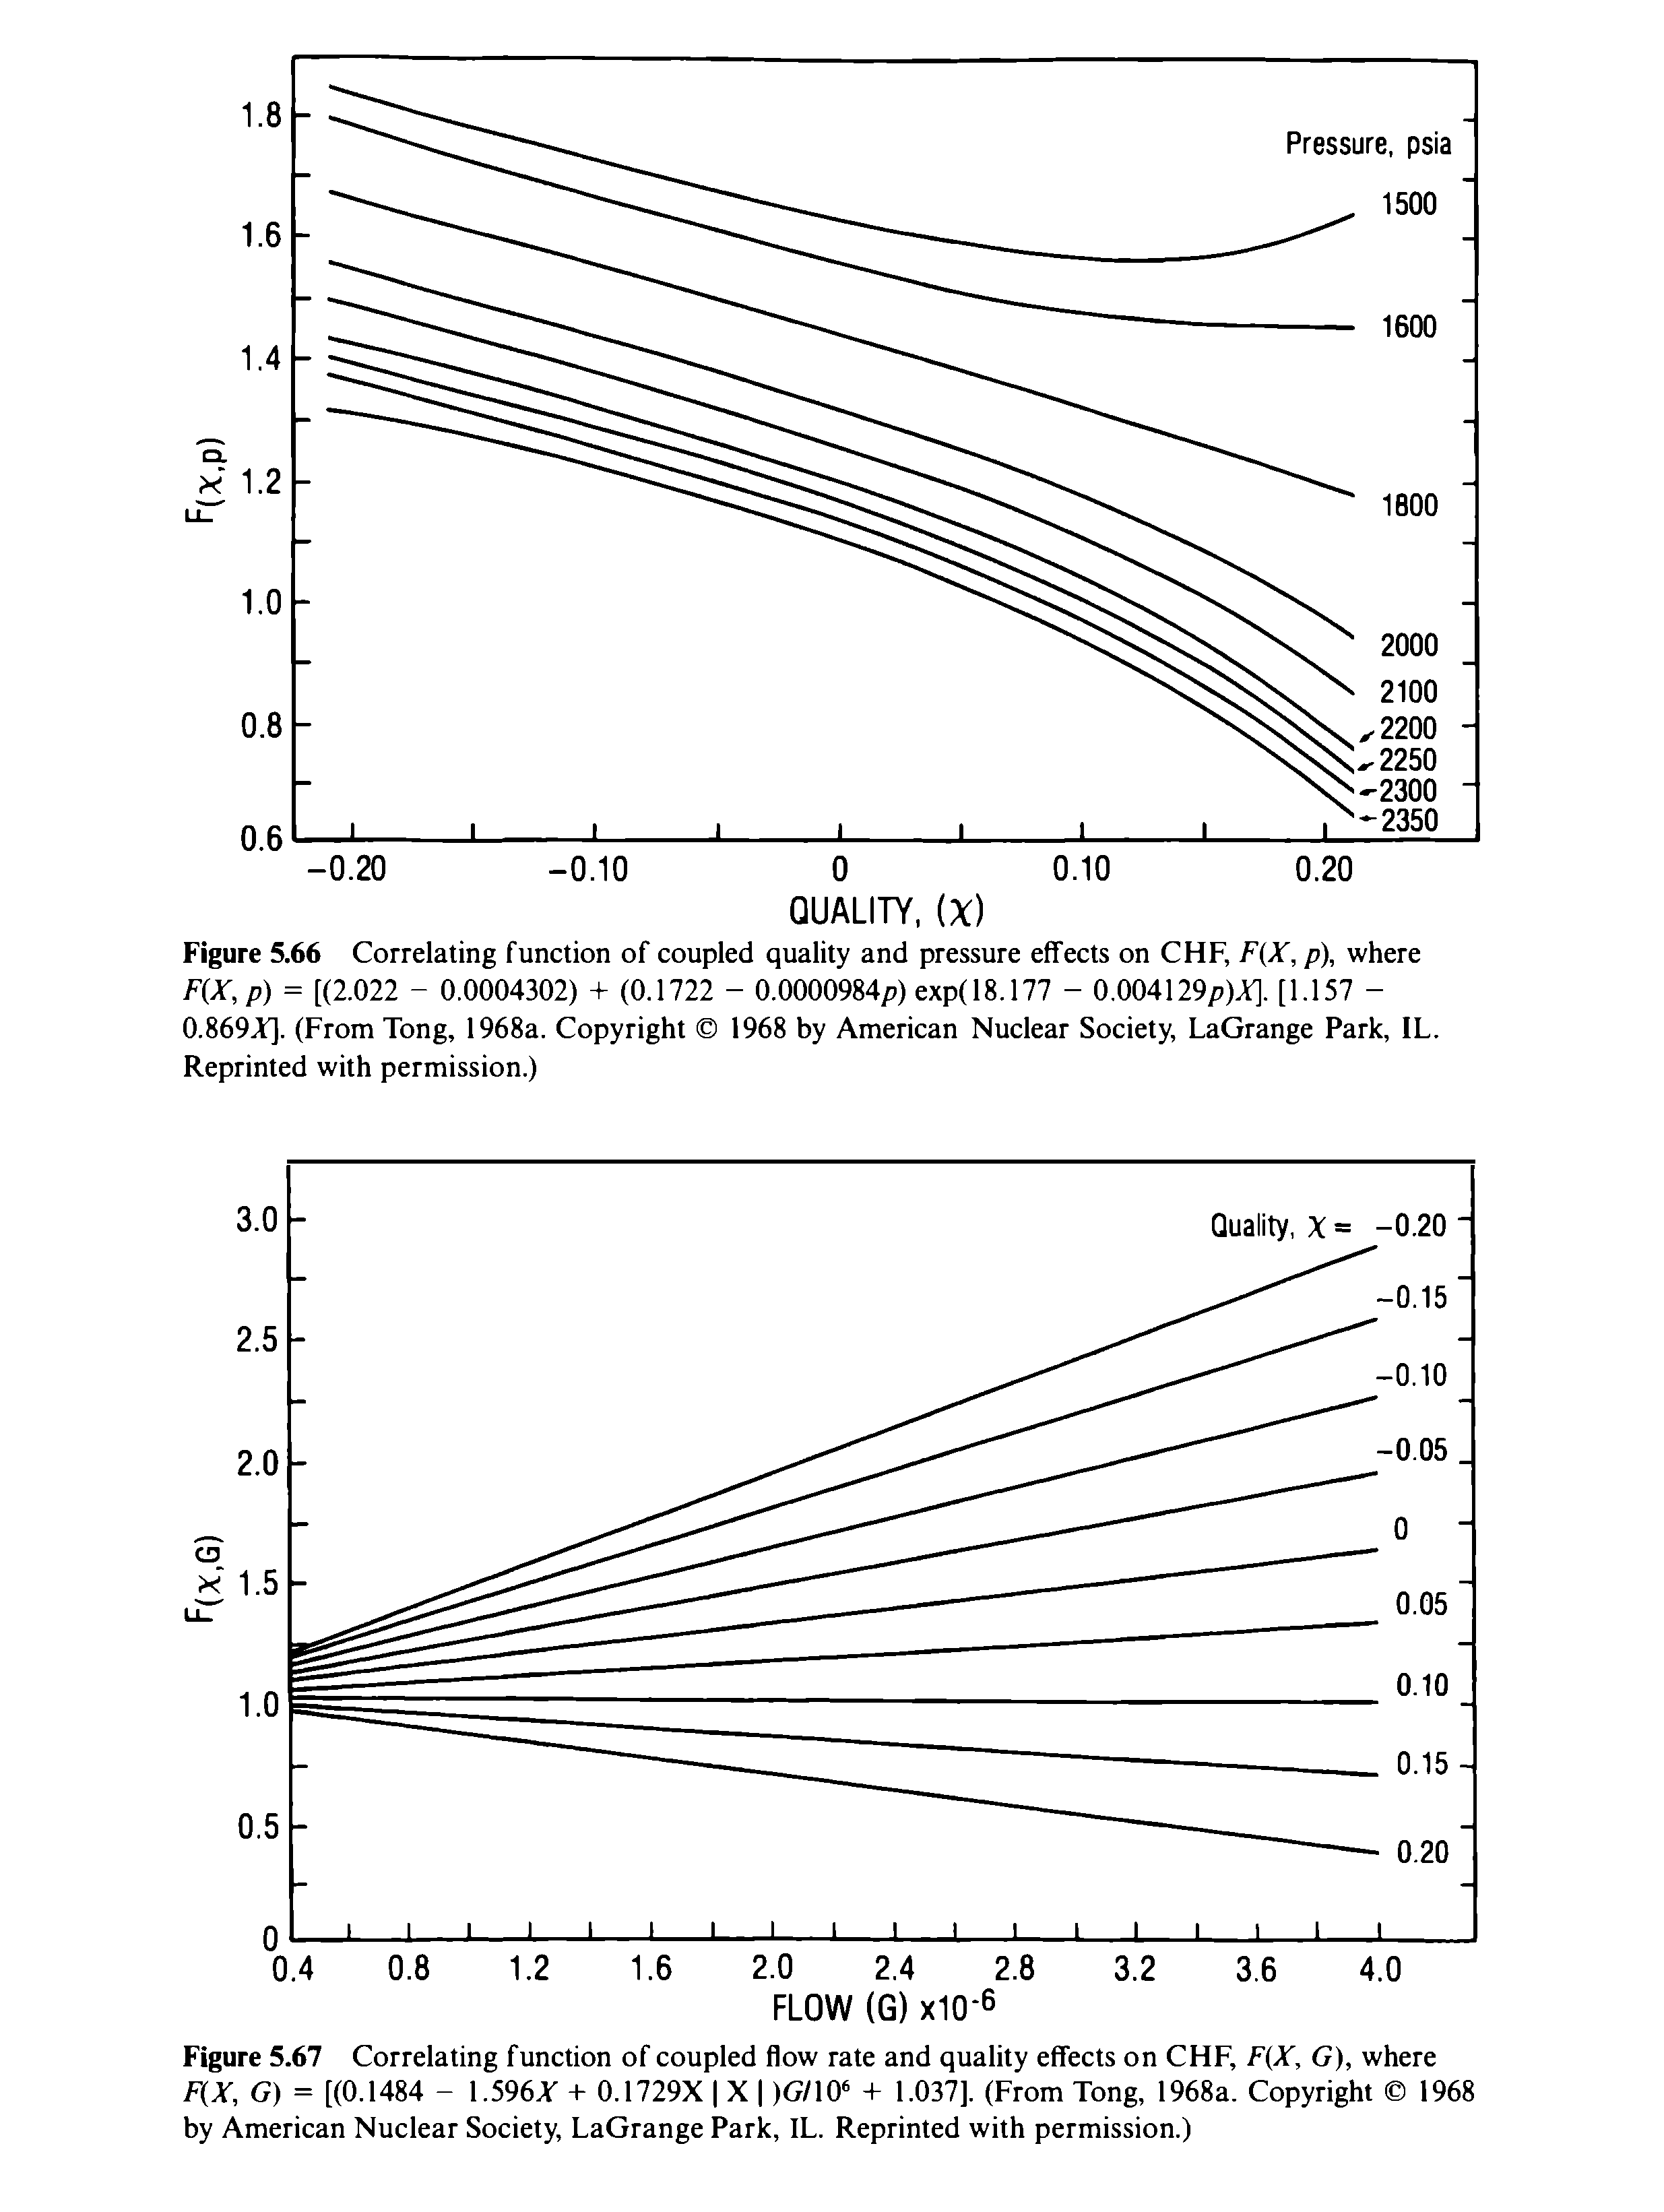 Figure 5.67 Correlating function of coupled flow rate and quality effects on CHF, F(X, G), where F(X, G) = [(0.1484 - 1.596T + 0.1729X X )G/106 + 1.037], (From Tong, 1968a. Copyright 1968 by American Nuclear Society, LaGrange Park, IL. Reprinted with permission.)...